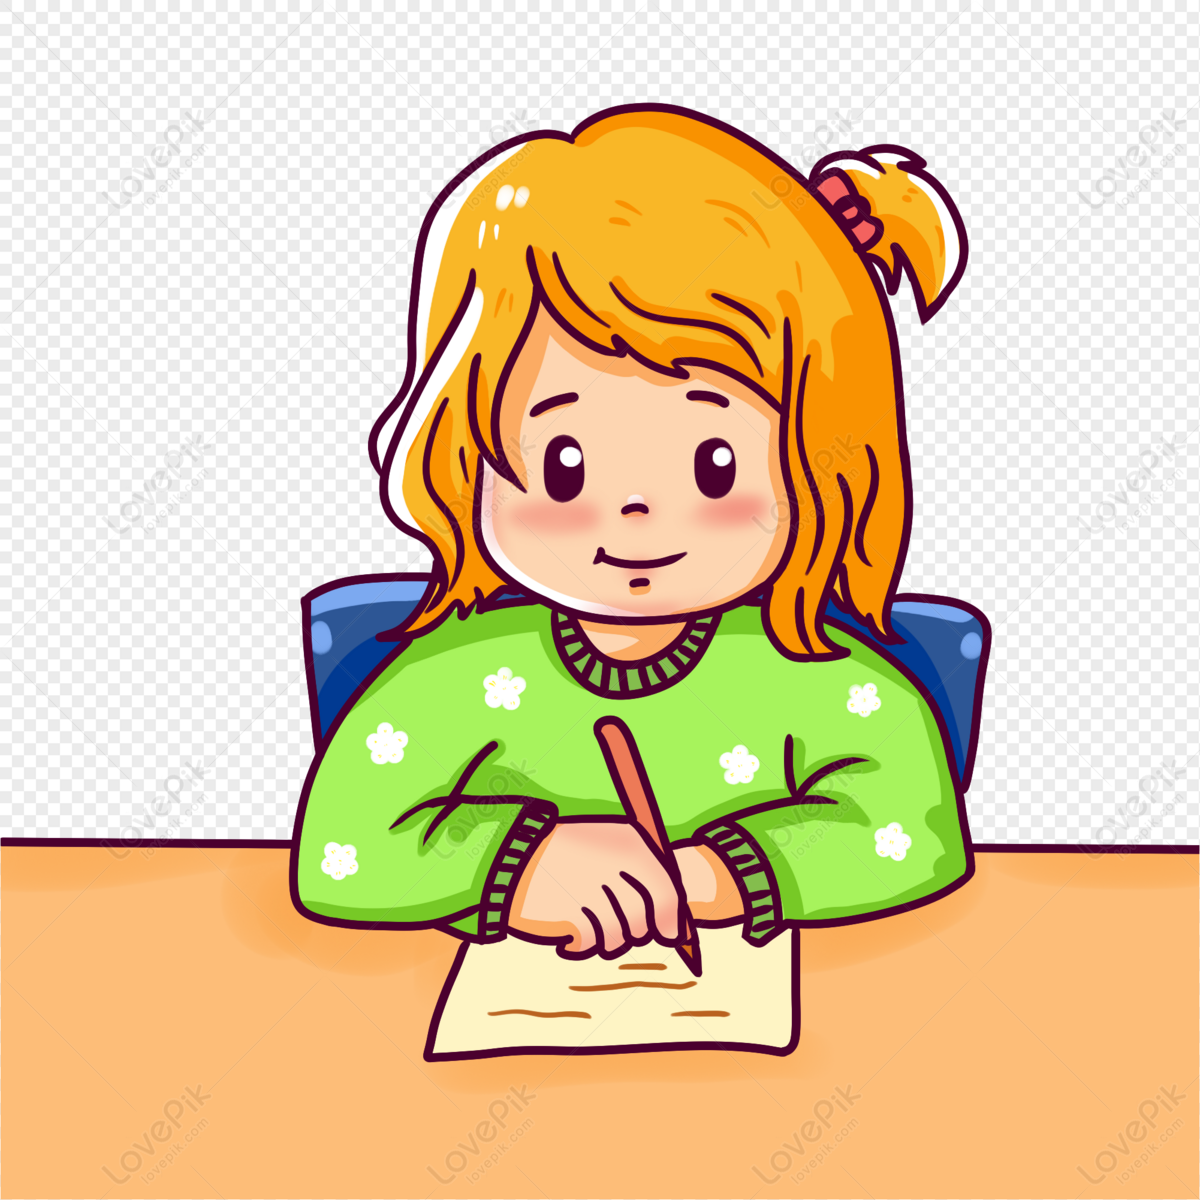 Children Writing Homework PNG Picture And Clipart Image For Free Download -  Lovepik | 401442485